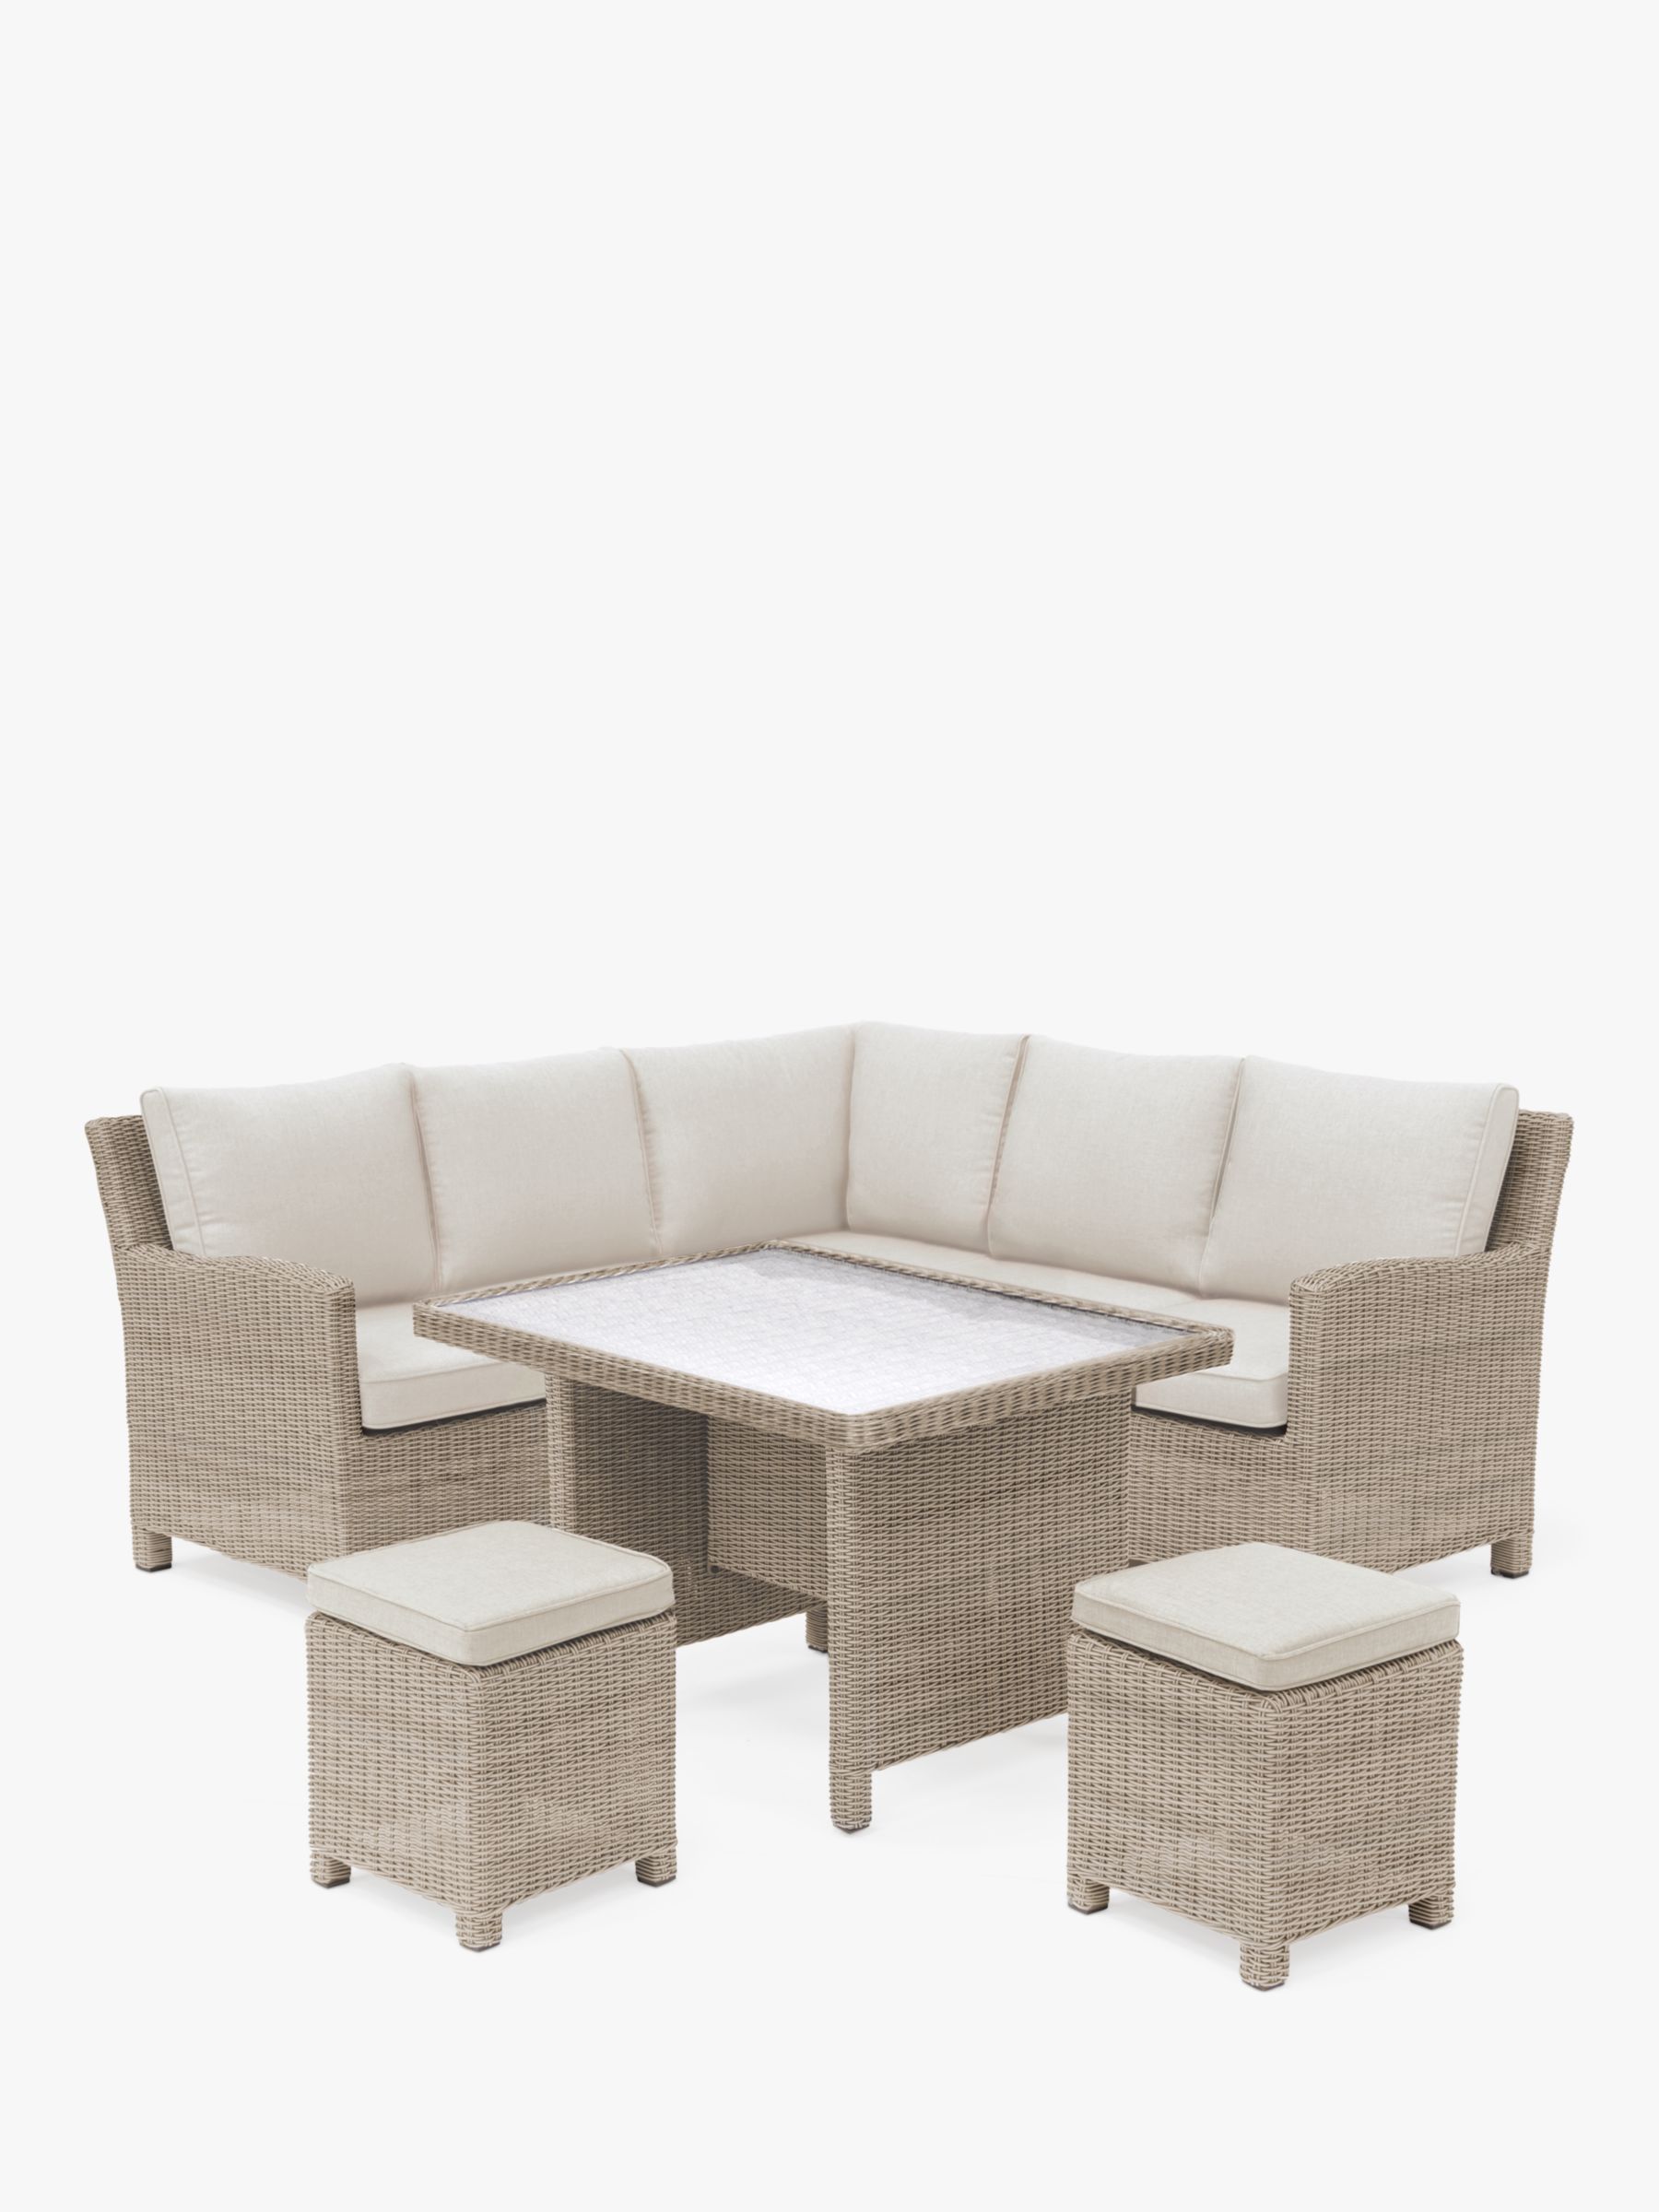 Photo of Kettler palma 7-seater corner garden mini casual dining set with glass top table